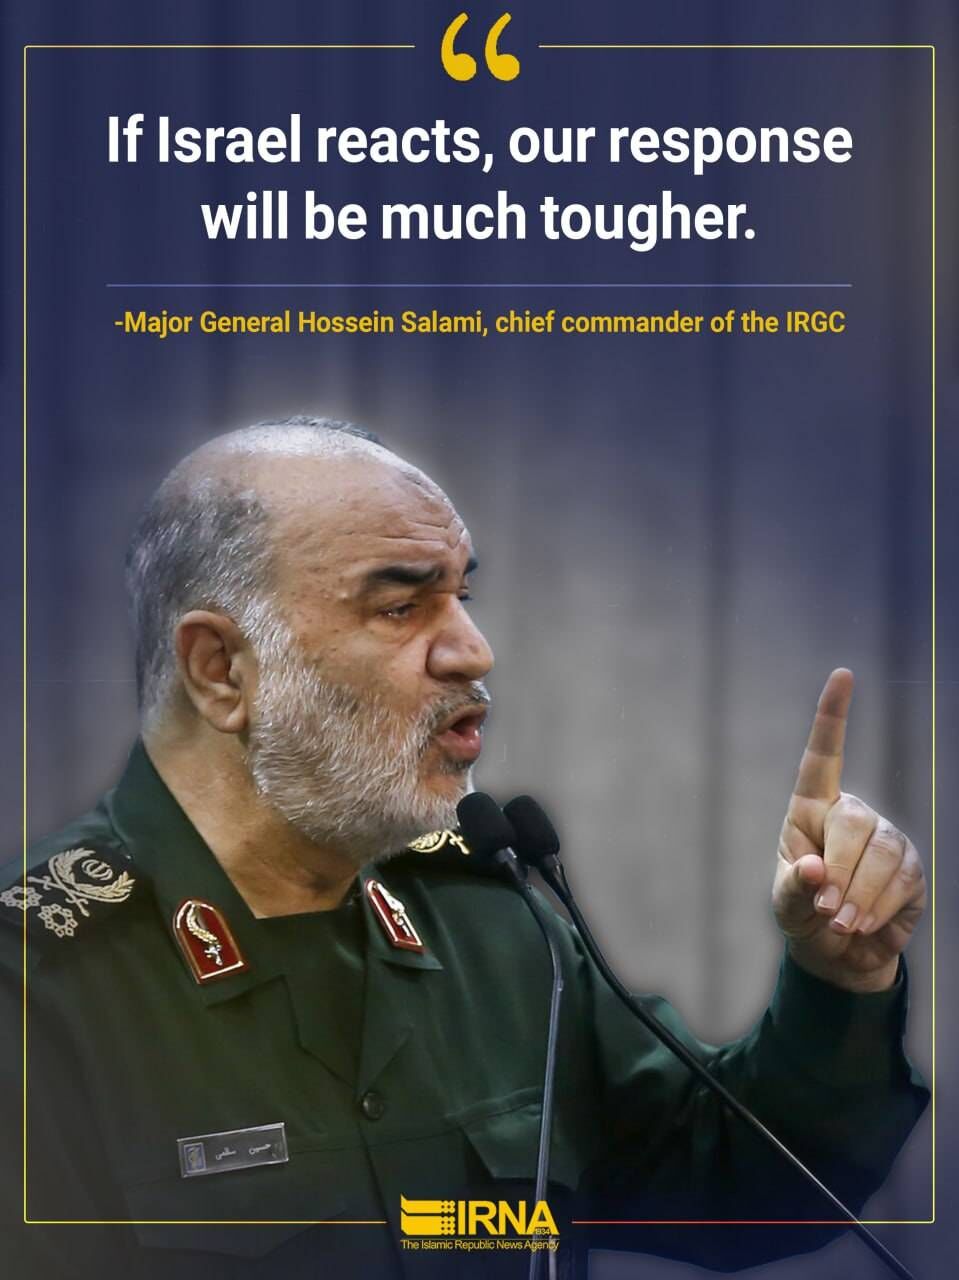 IRGC Commander: Israel will face tougher response if reacts